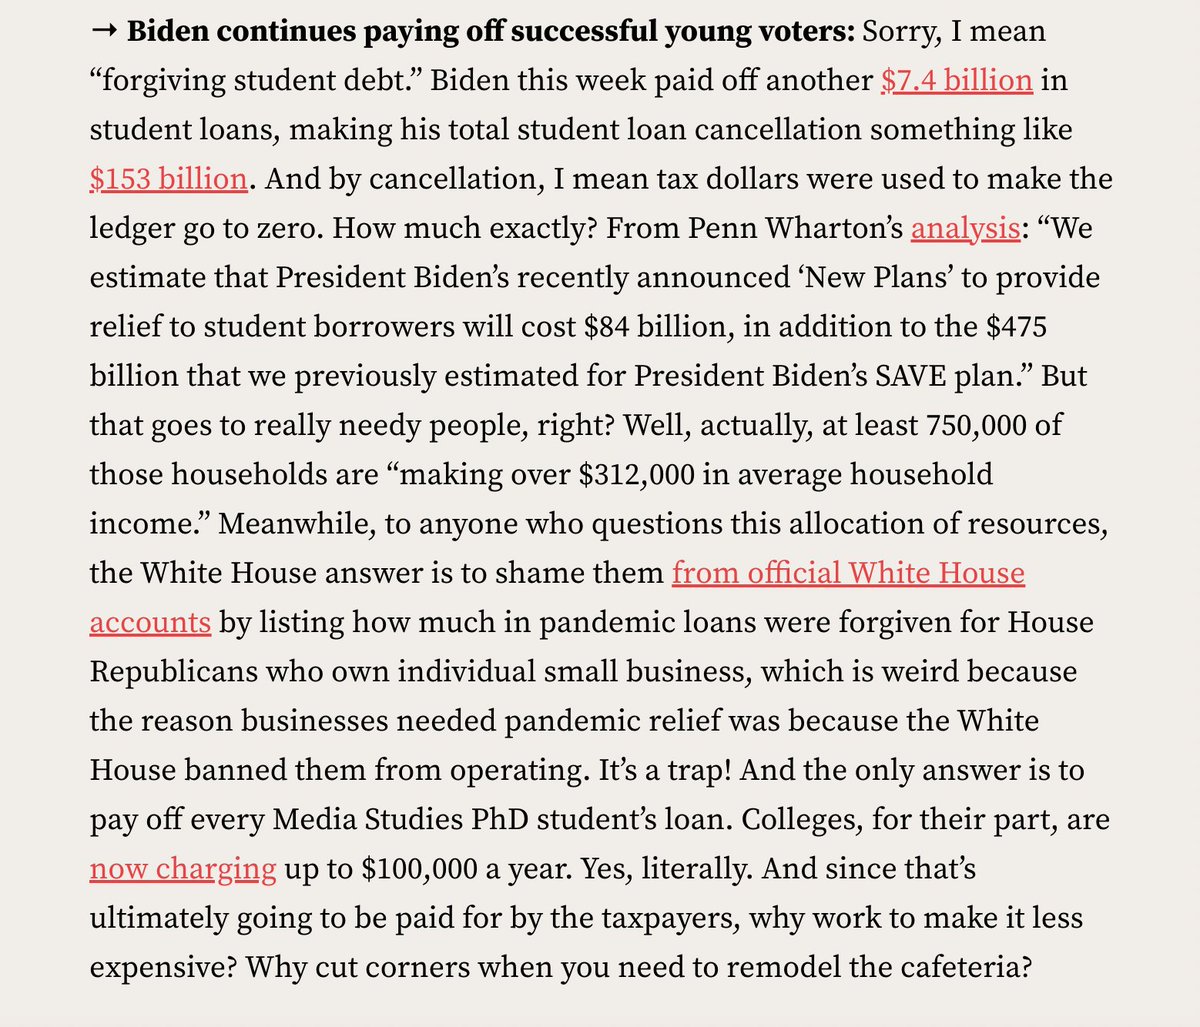 'Colleges, for their part, are now charging up to $100,000 a year. Yes, literally. And since that’s ultimately going to be paid for by the taxpayers, why work to make it less expensive?' Spot on, @NellieBowles. thefp.com/p/tgif-wwiii-m…